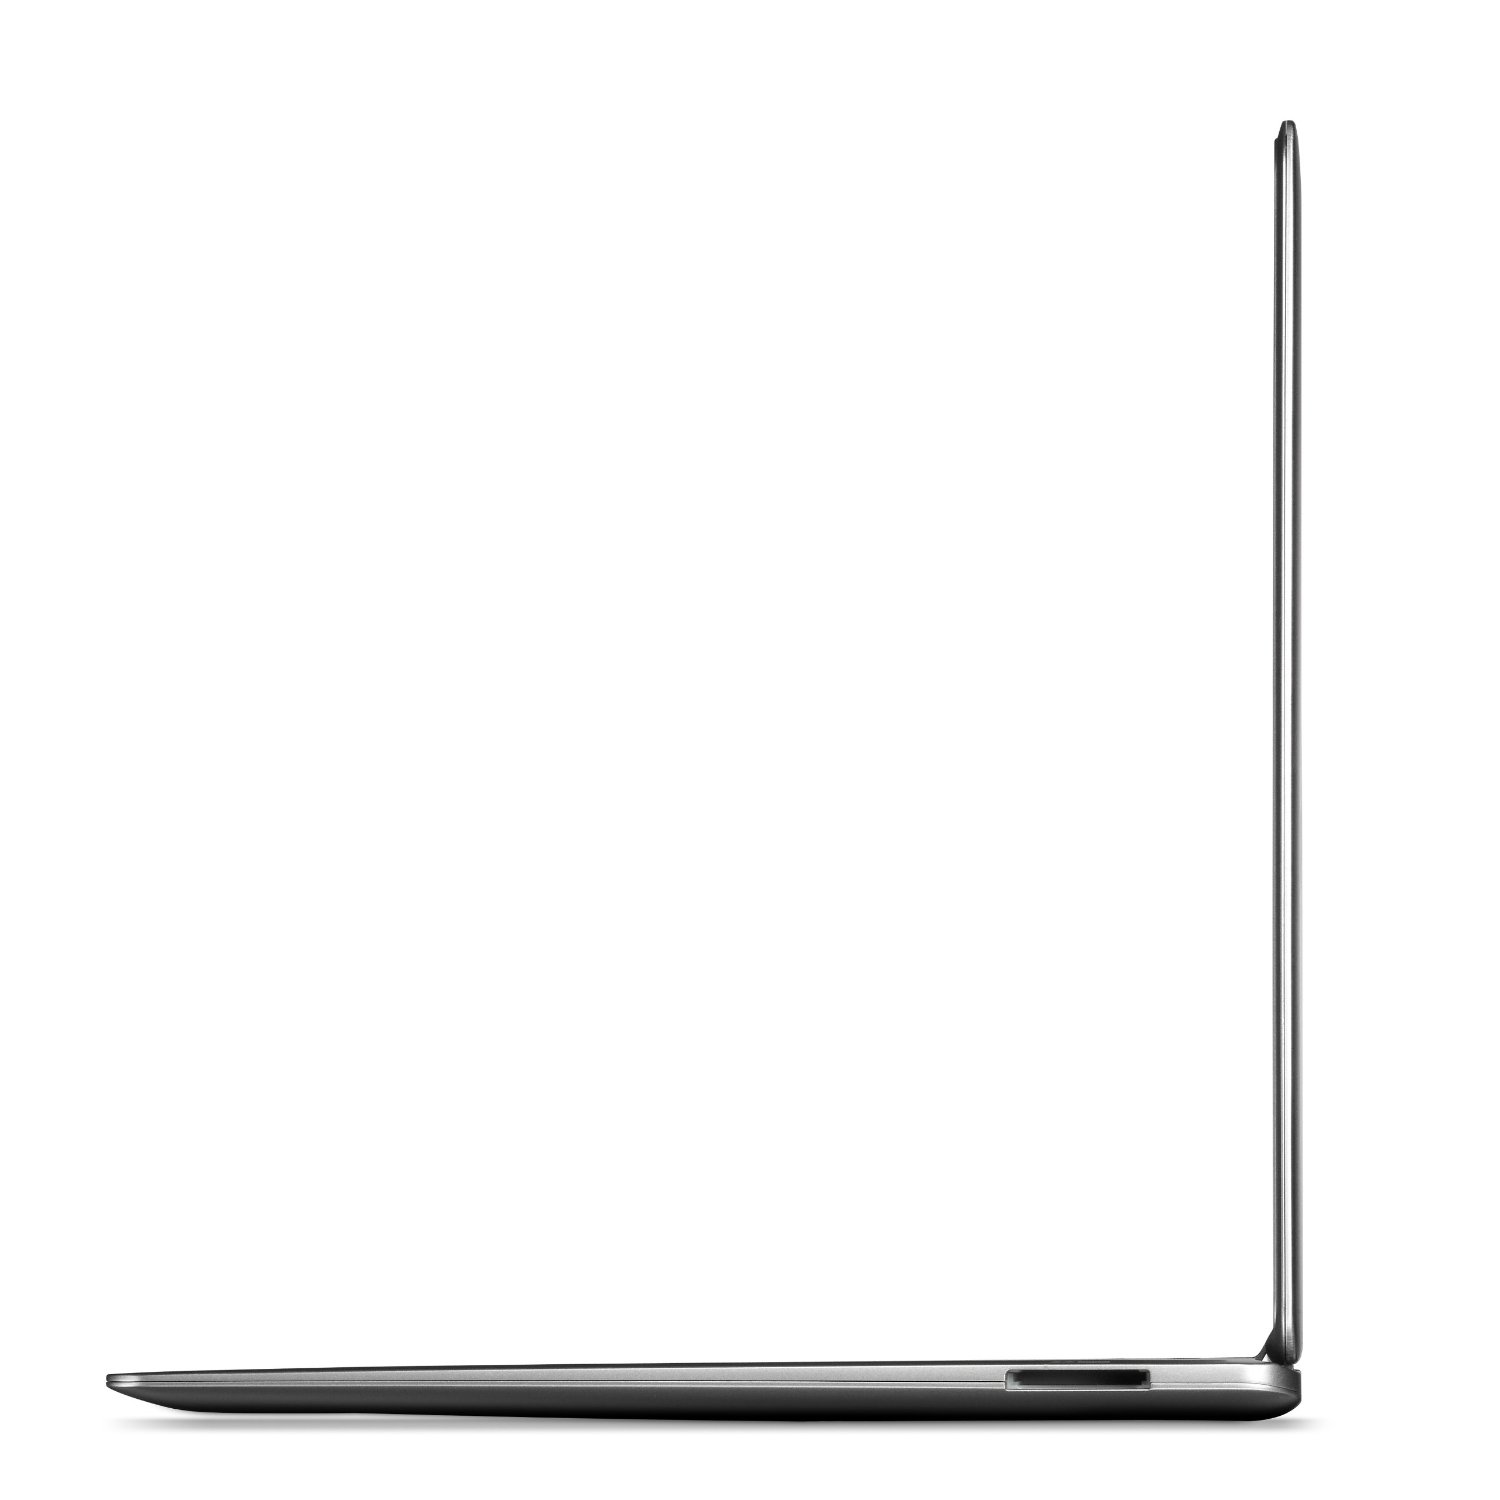 http://thetechjournal.com/wp-content/uploads/images/1110/1318646337-acer-aspire-s39516646-ultrabook-with-133inch-hd-display-8.jpg